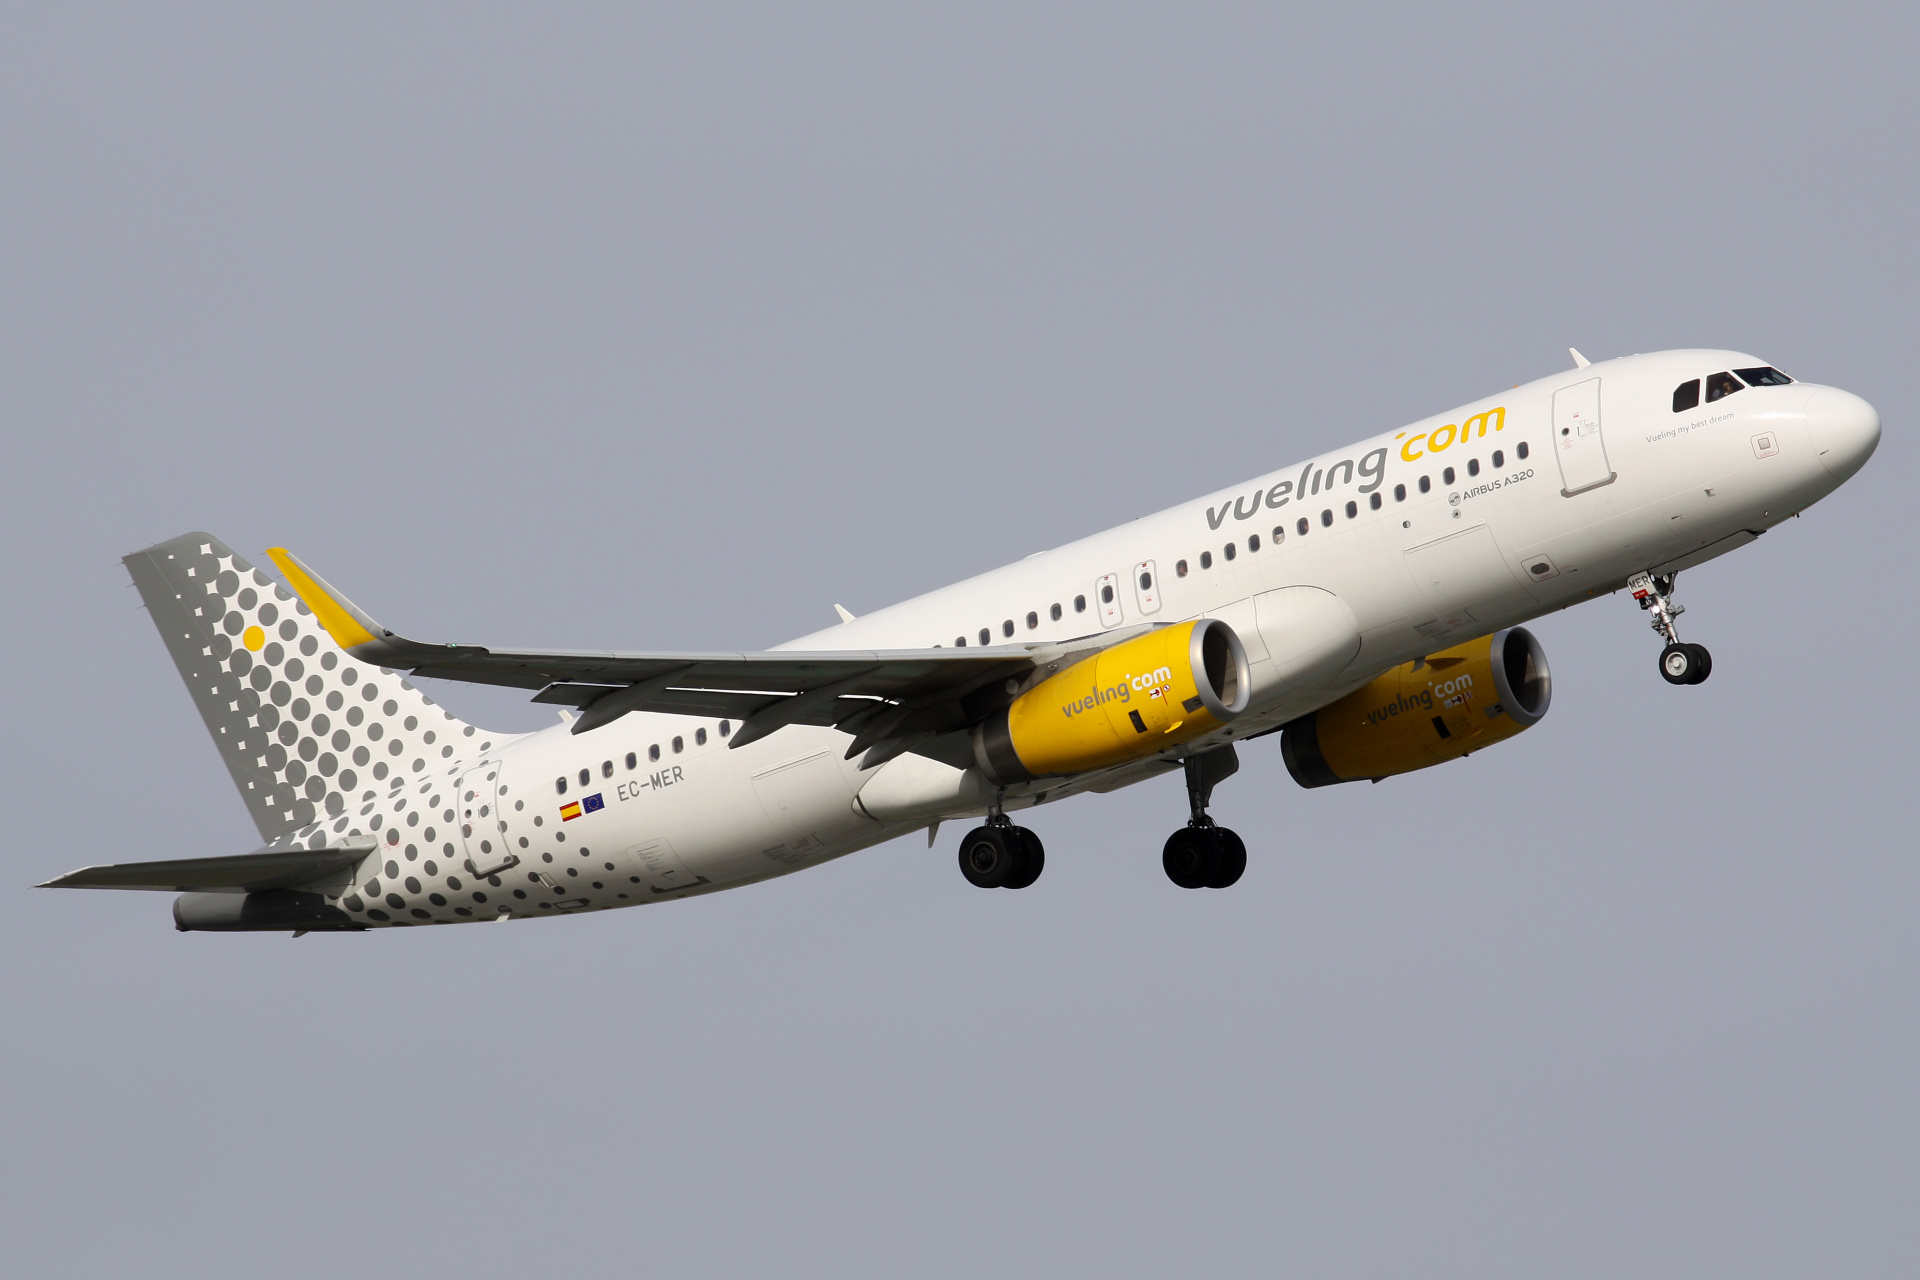 EC-MER (Aircraft » EPWA Spotting » Airbus A320-200 » Vueling Airlines)